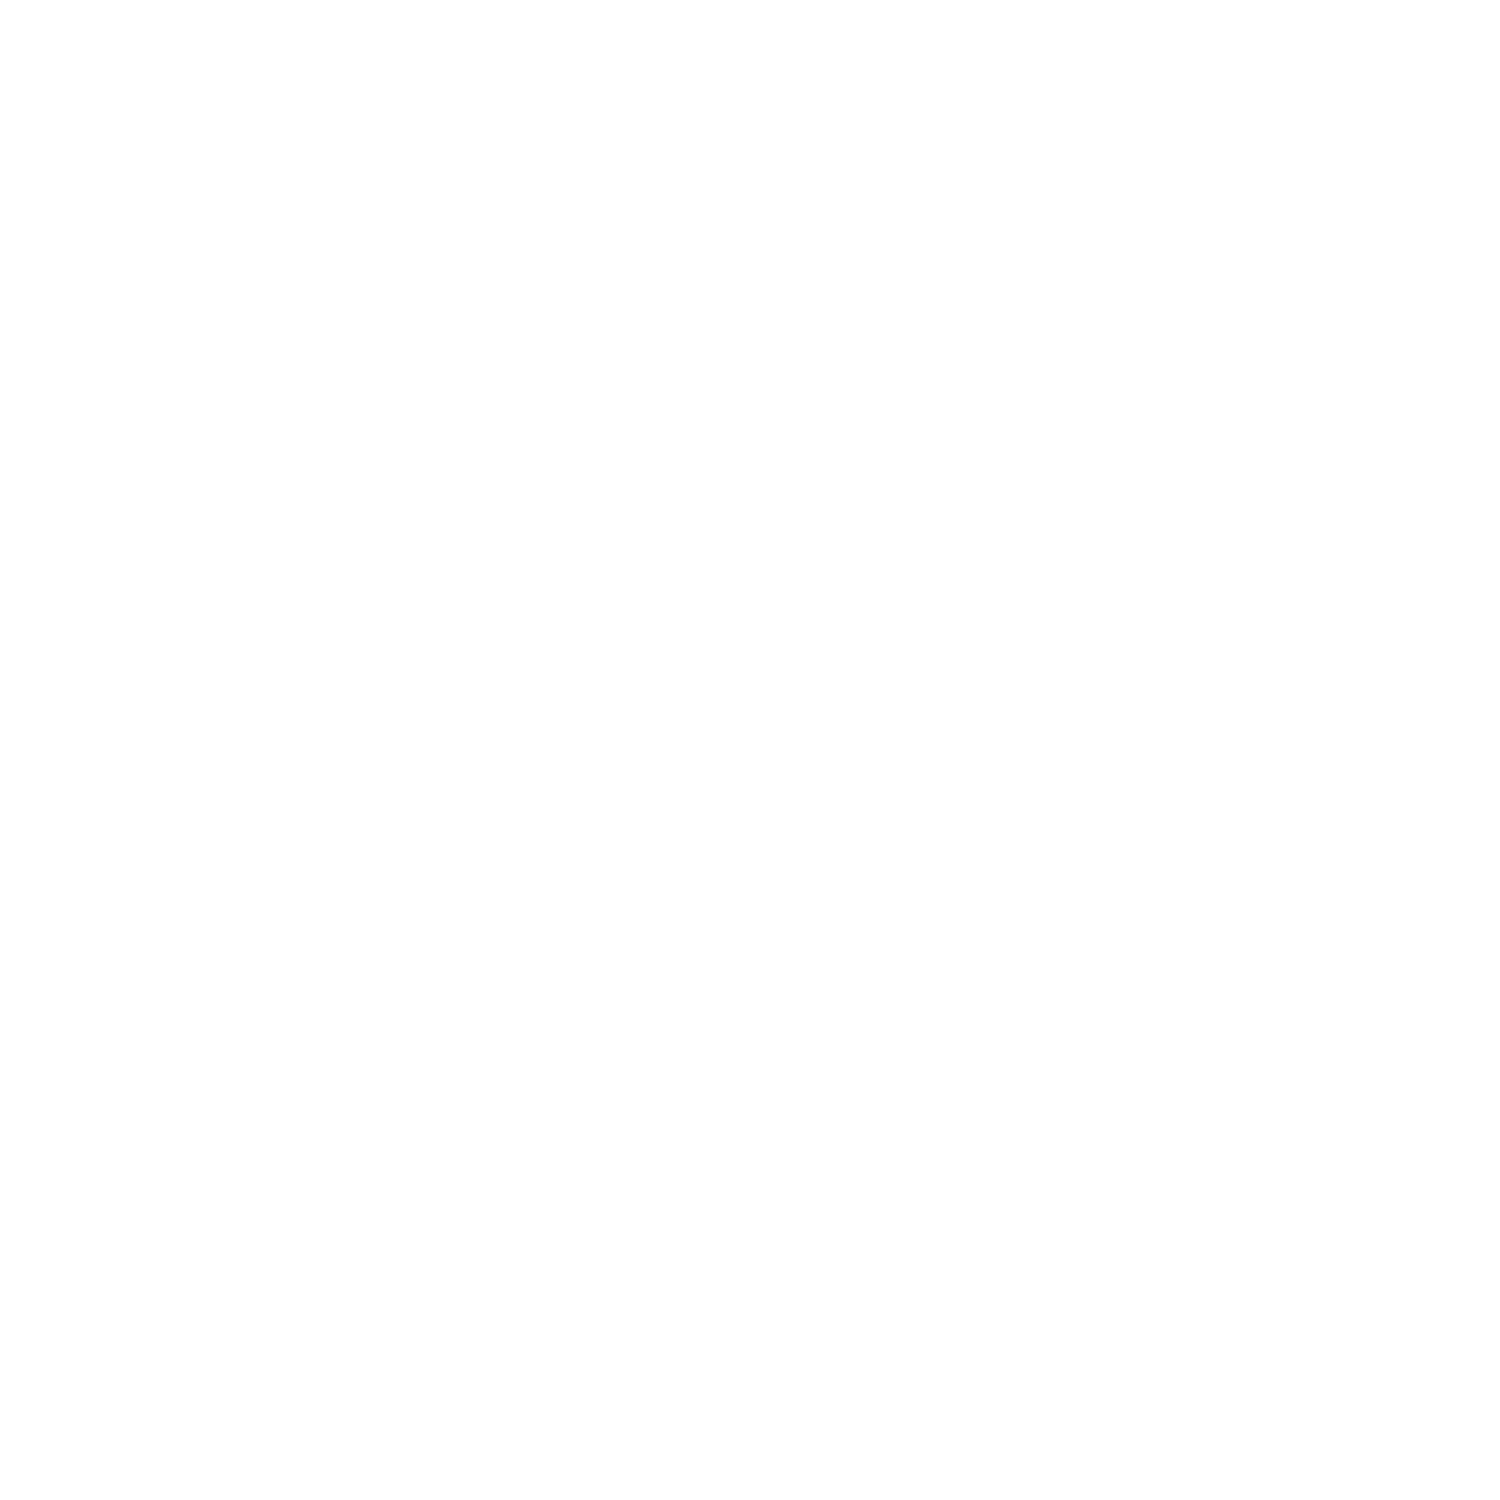 Brighton Coffee House and Theater